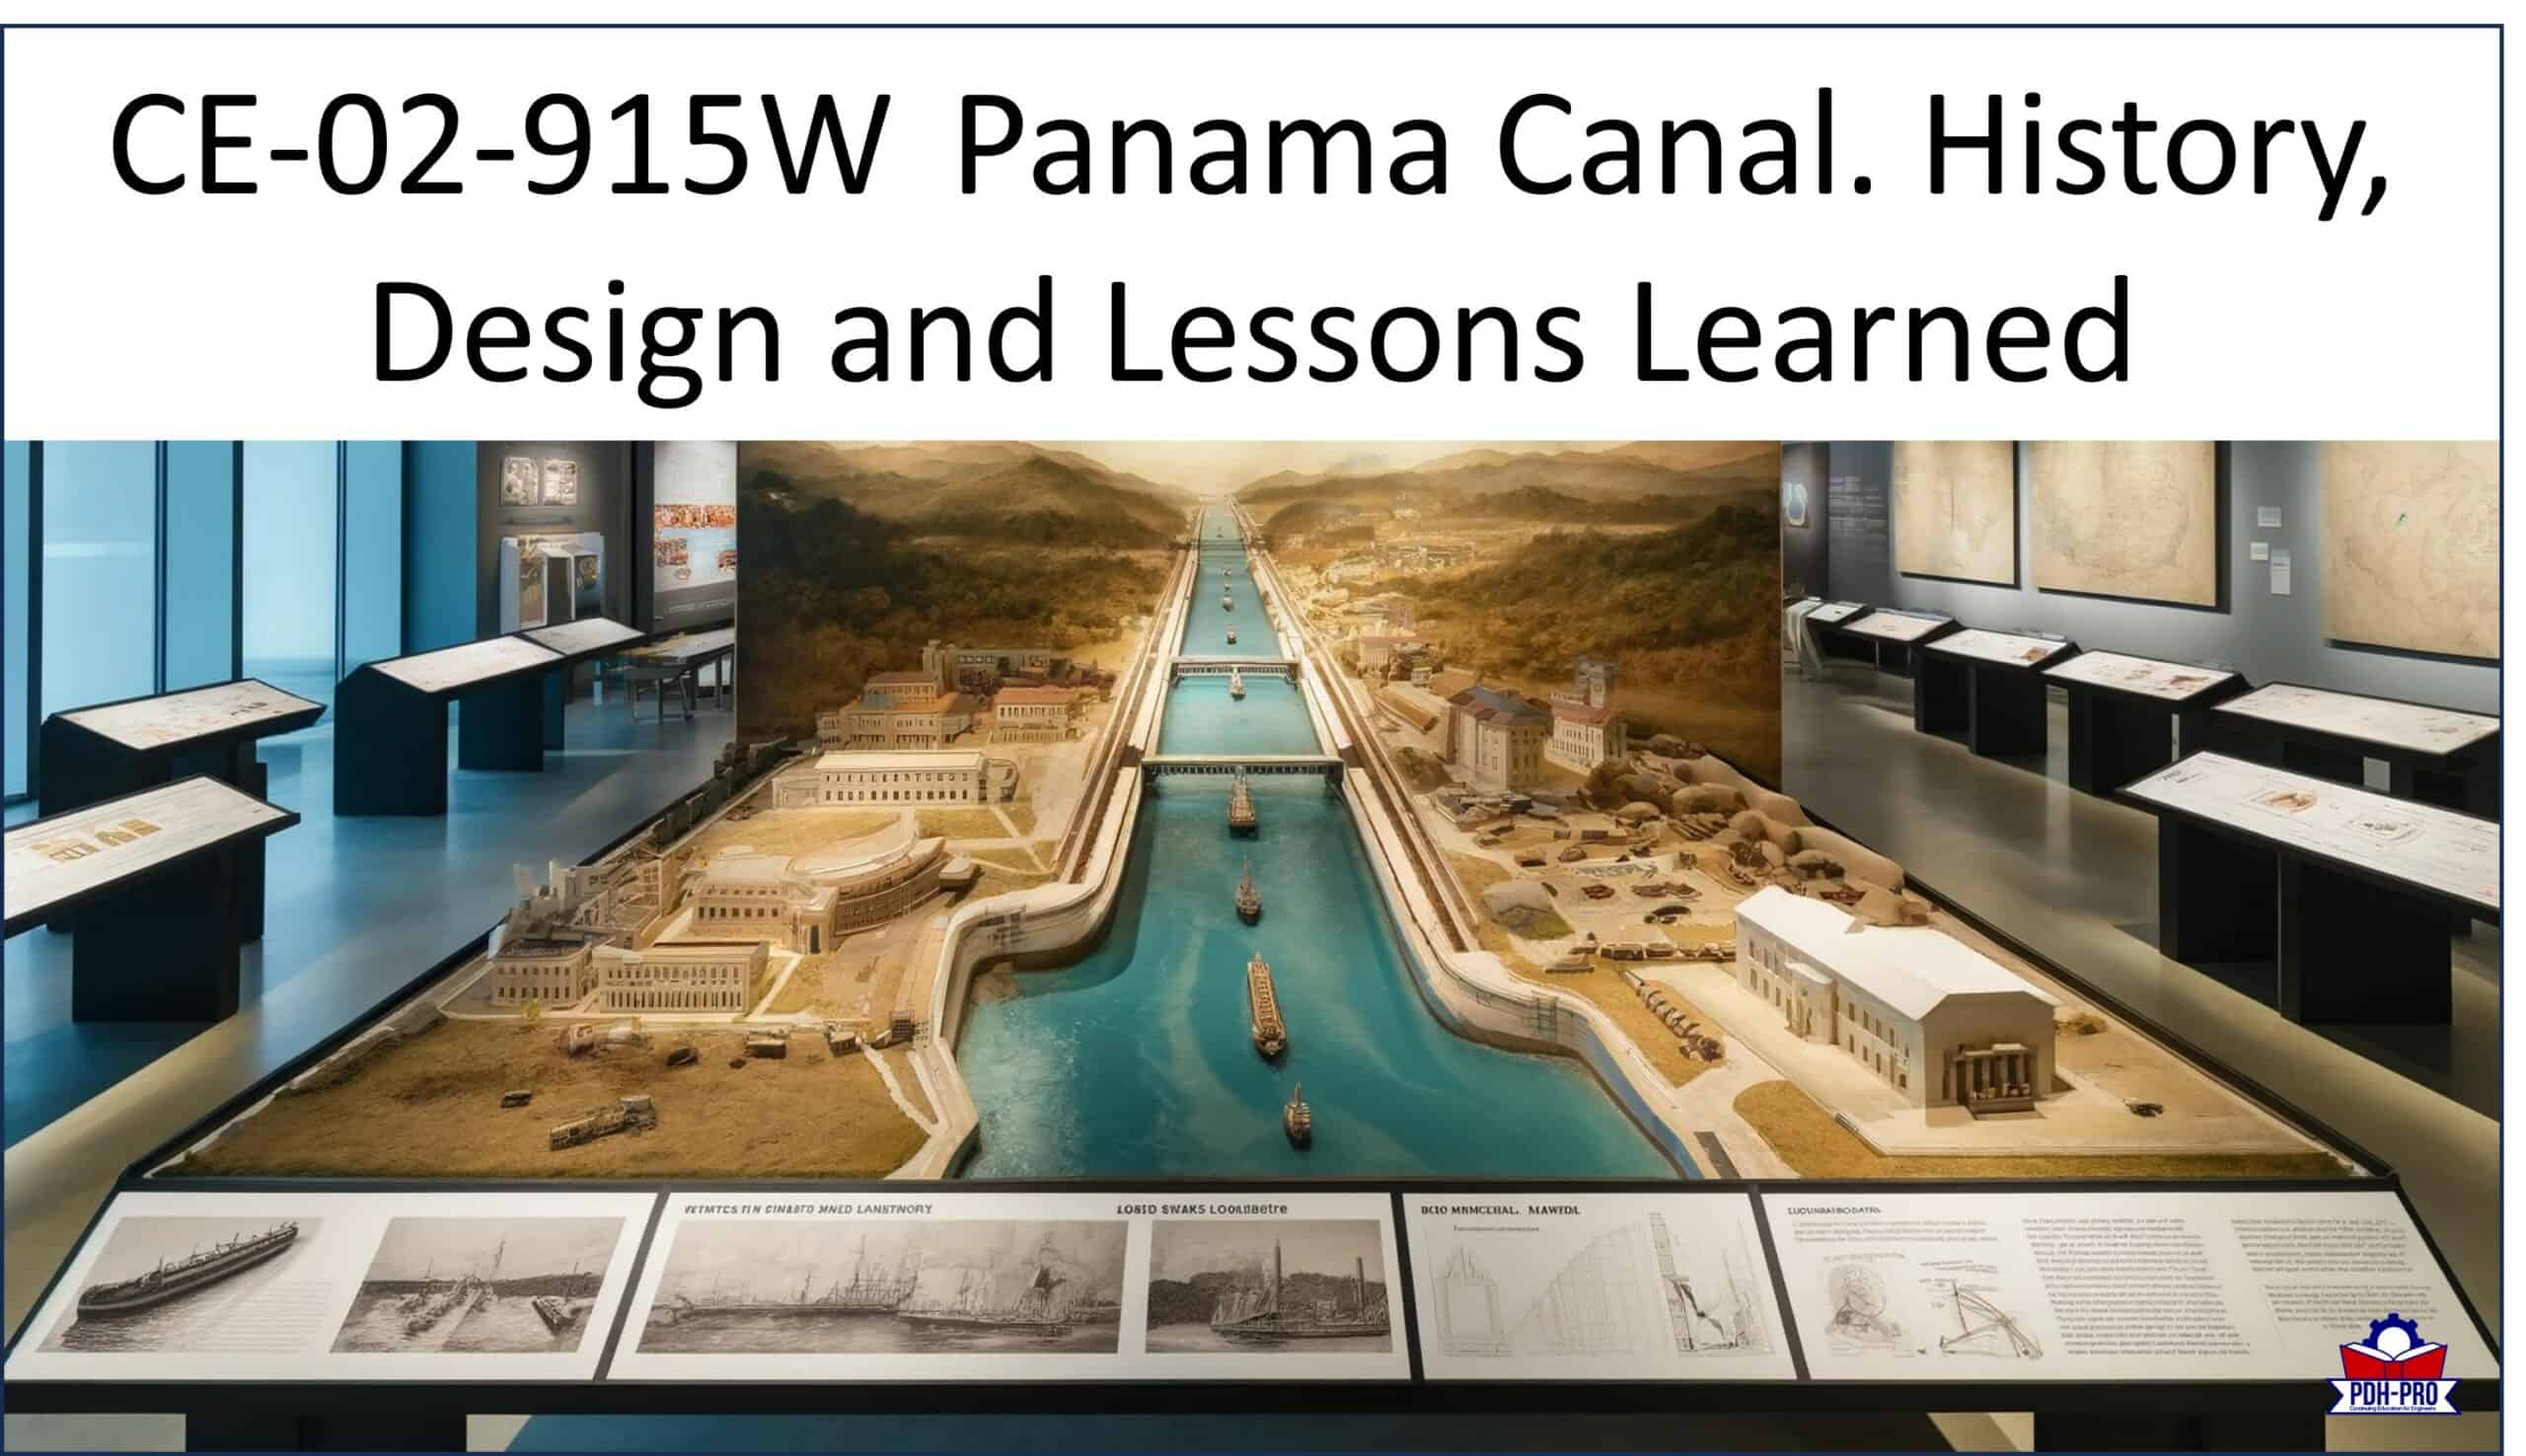 Panama Canal. History, Design and Lessons Learned